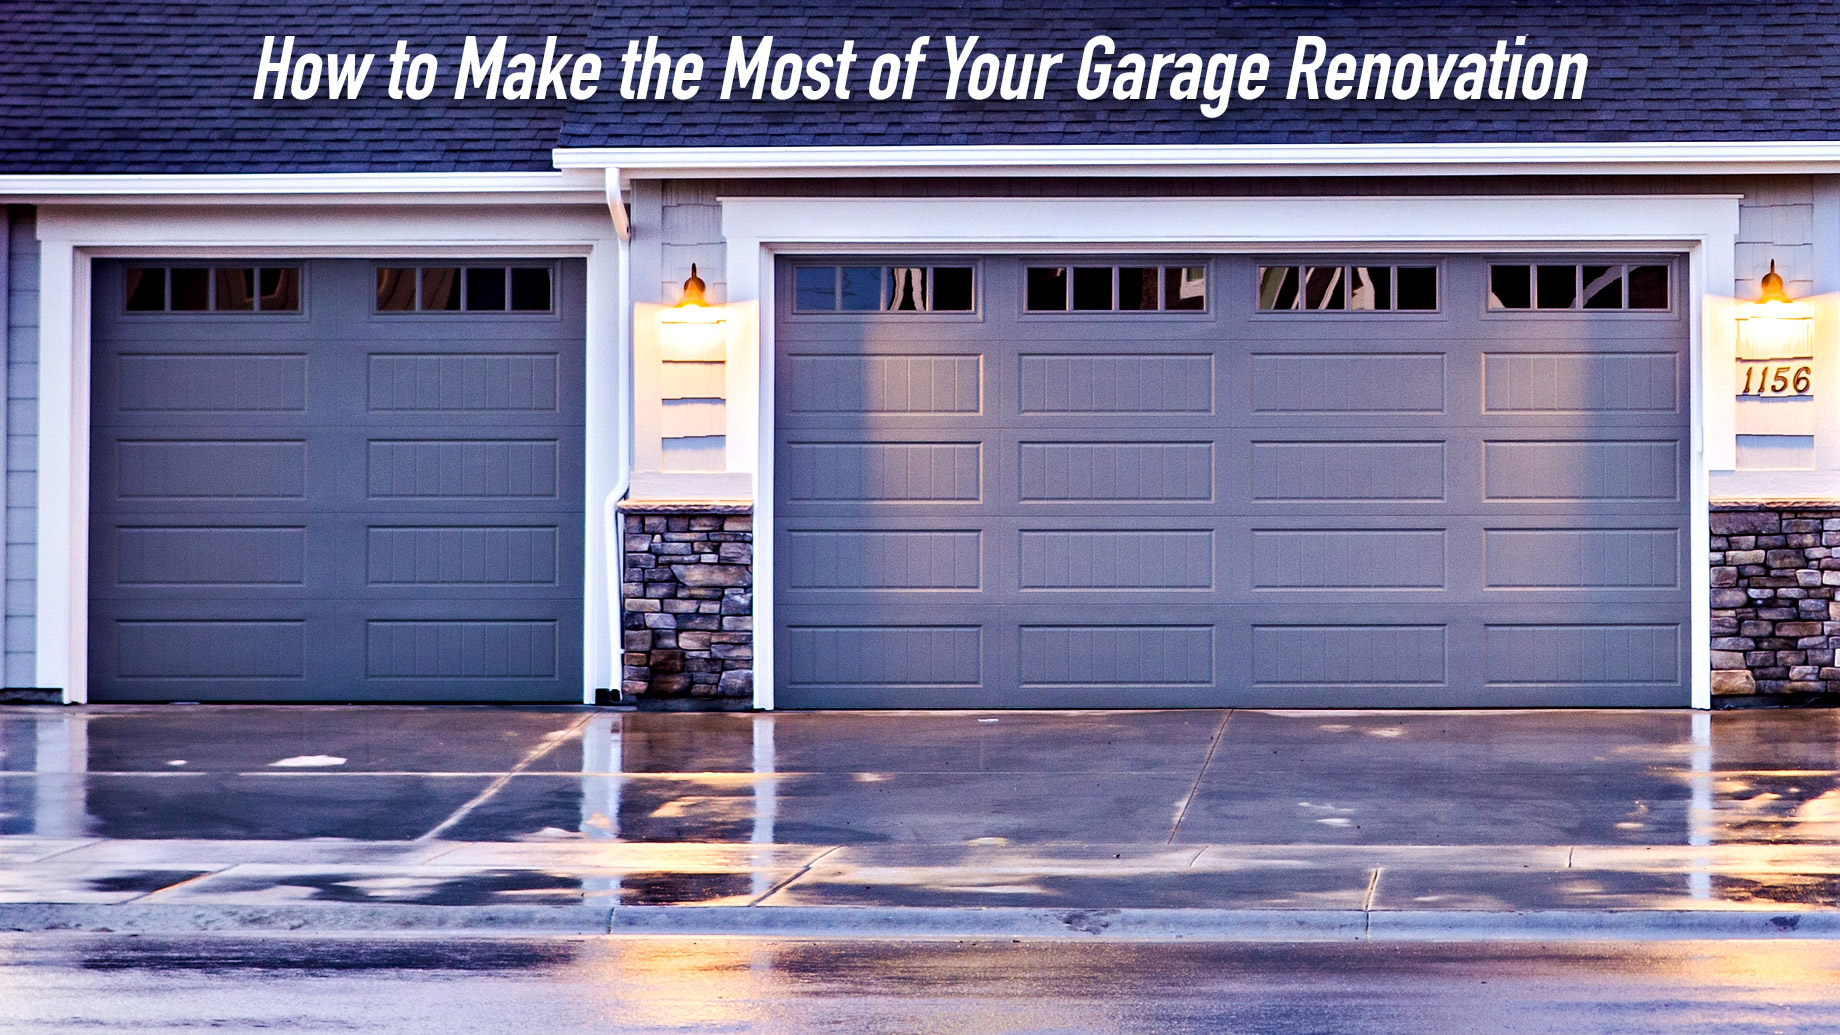 How to Make the Most of Your Garage Renovation